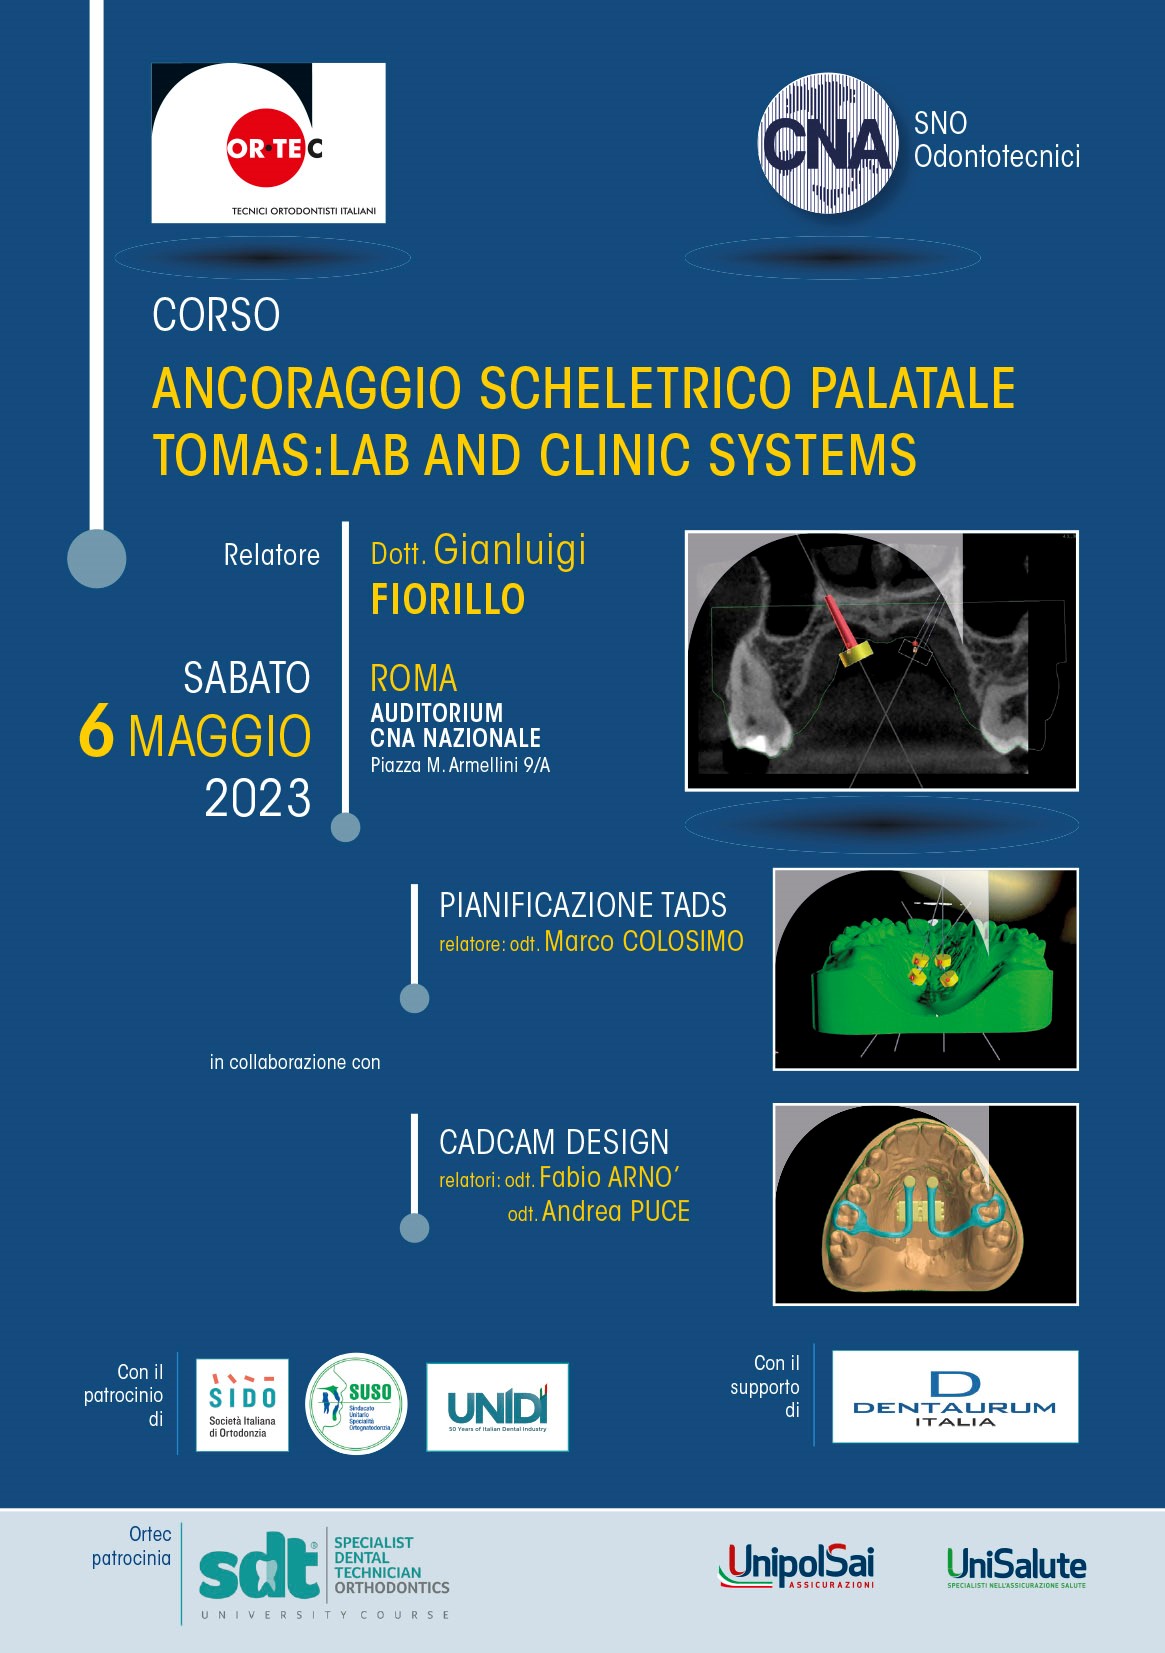 Ancoraggio scheletrico palatale Tomas: Lab and Clinic Systems